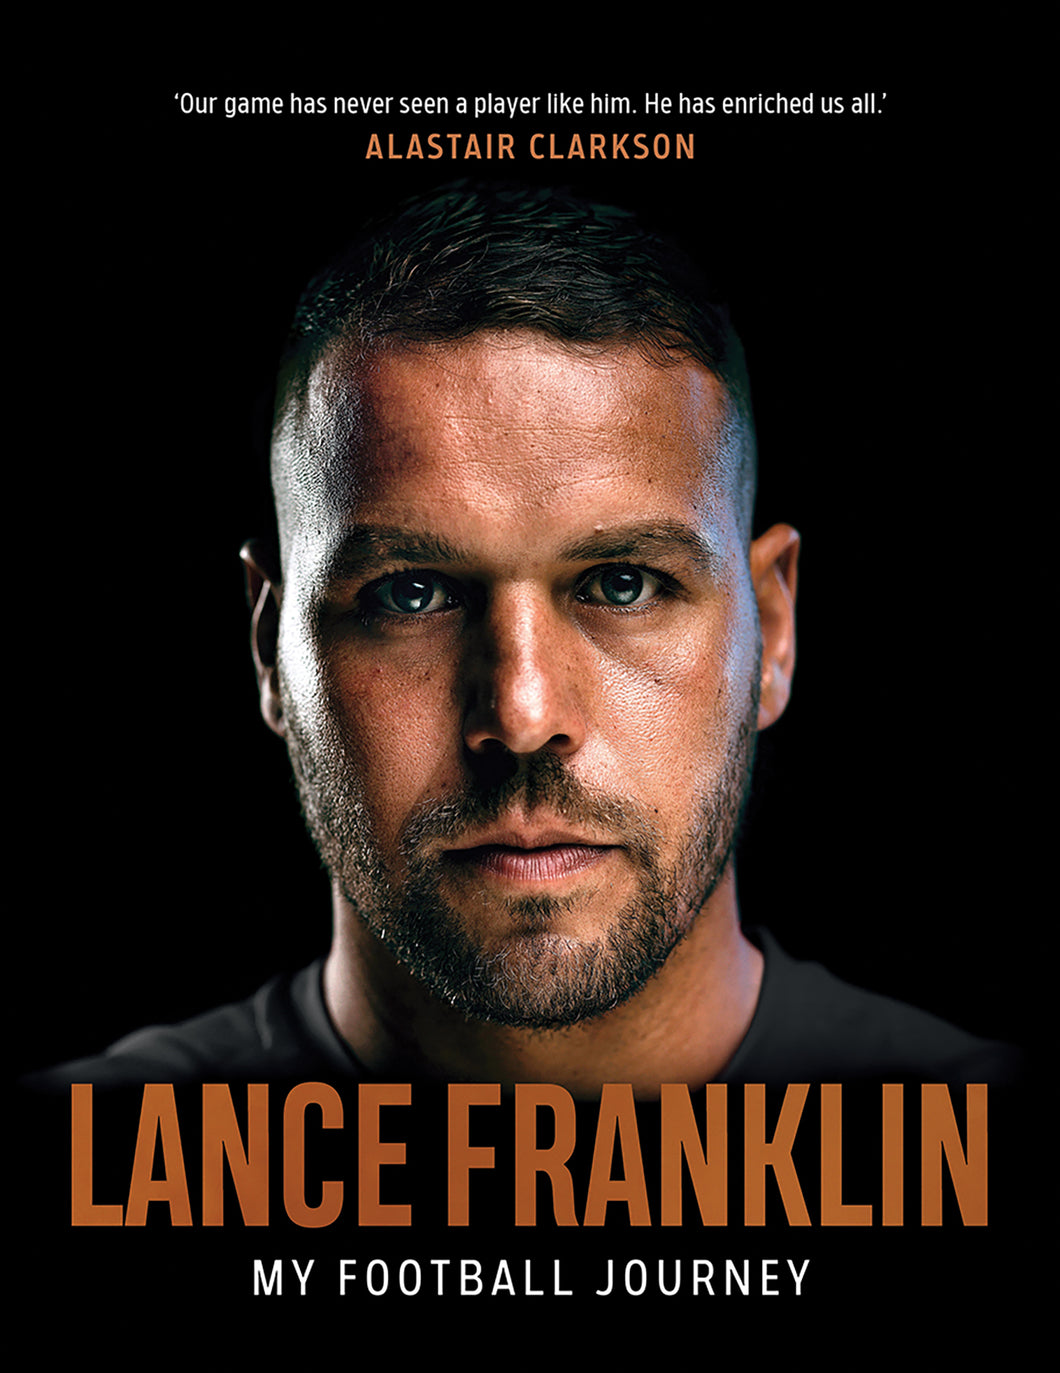 My Football Journey by Lance Franklin